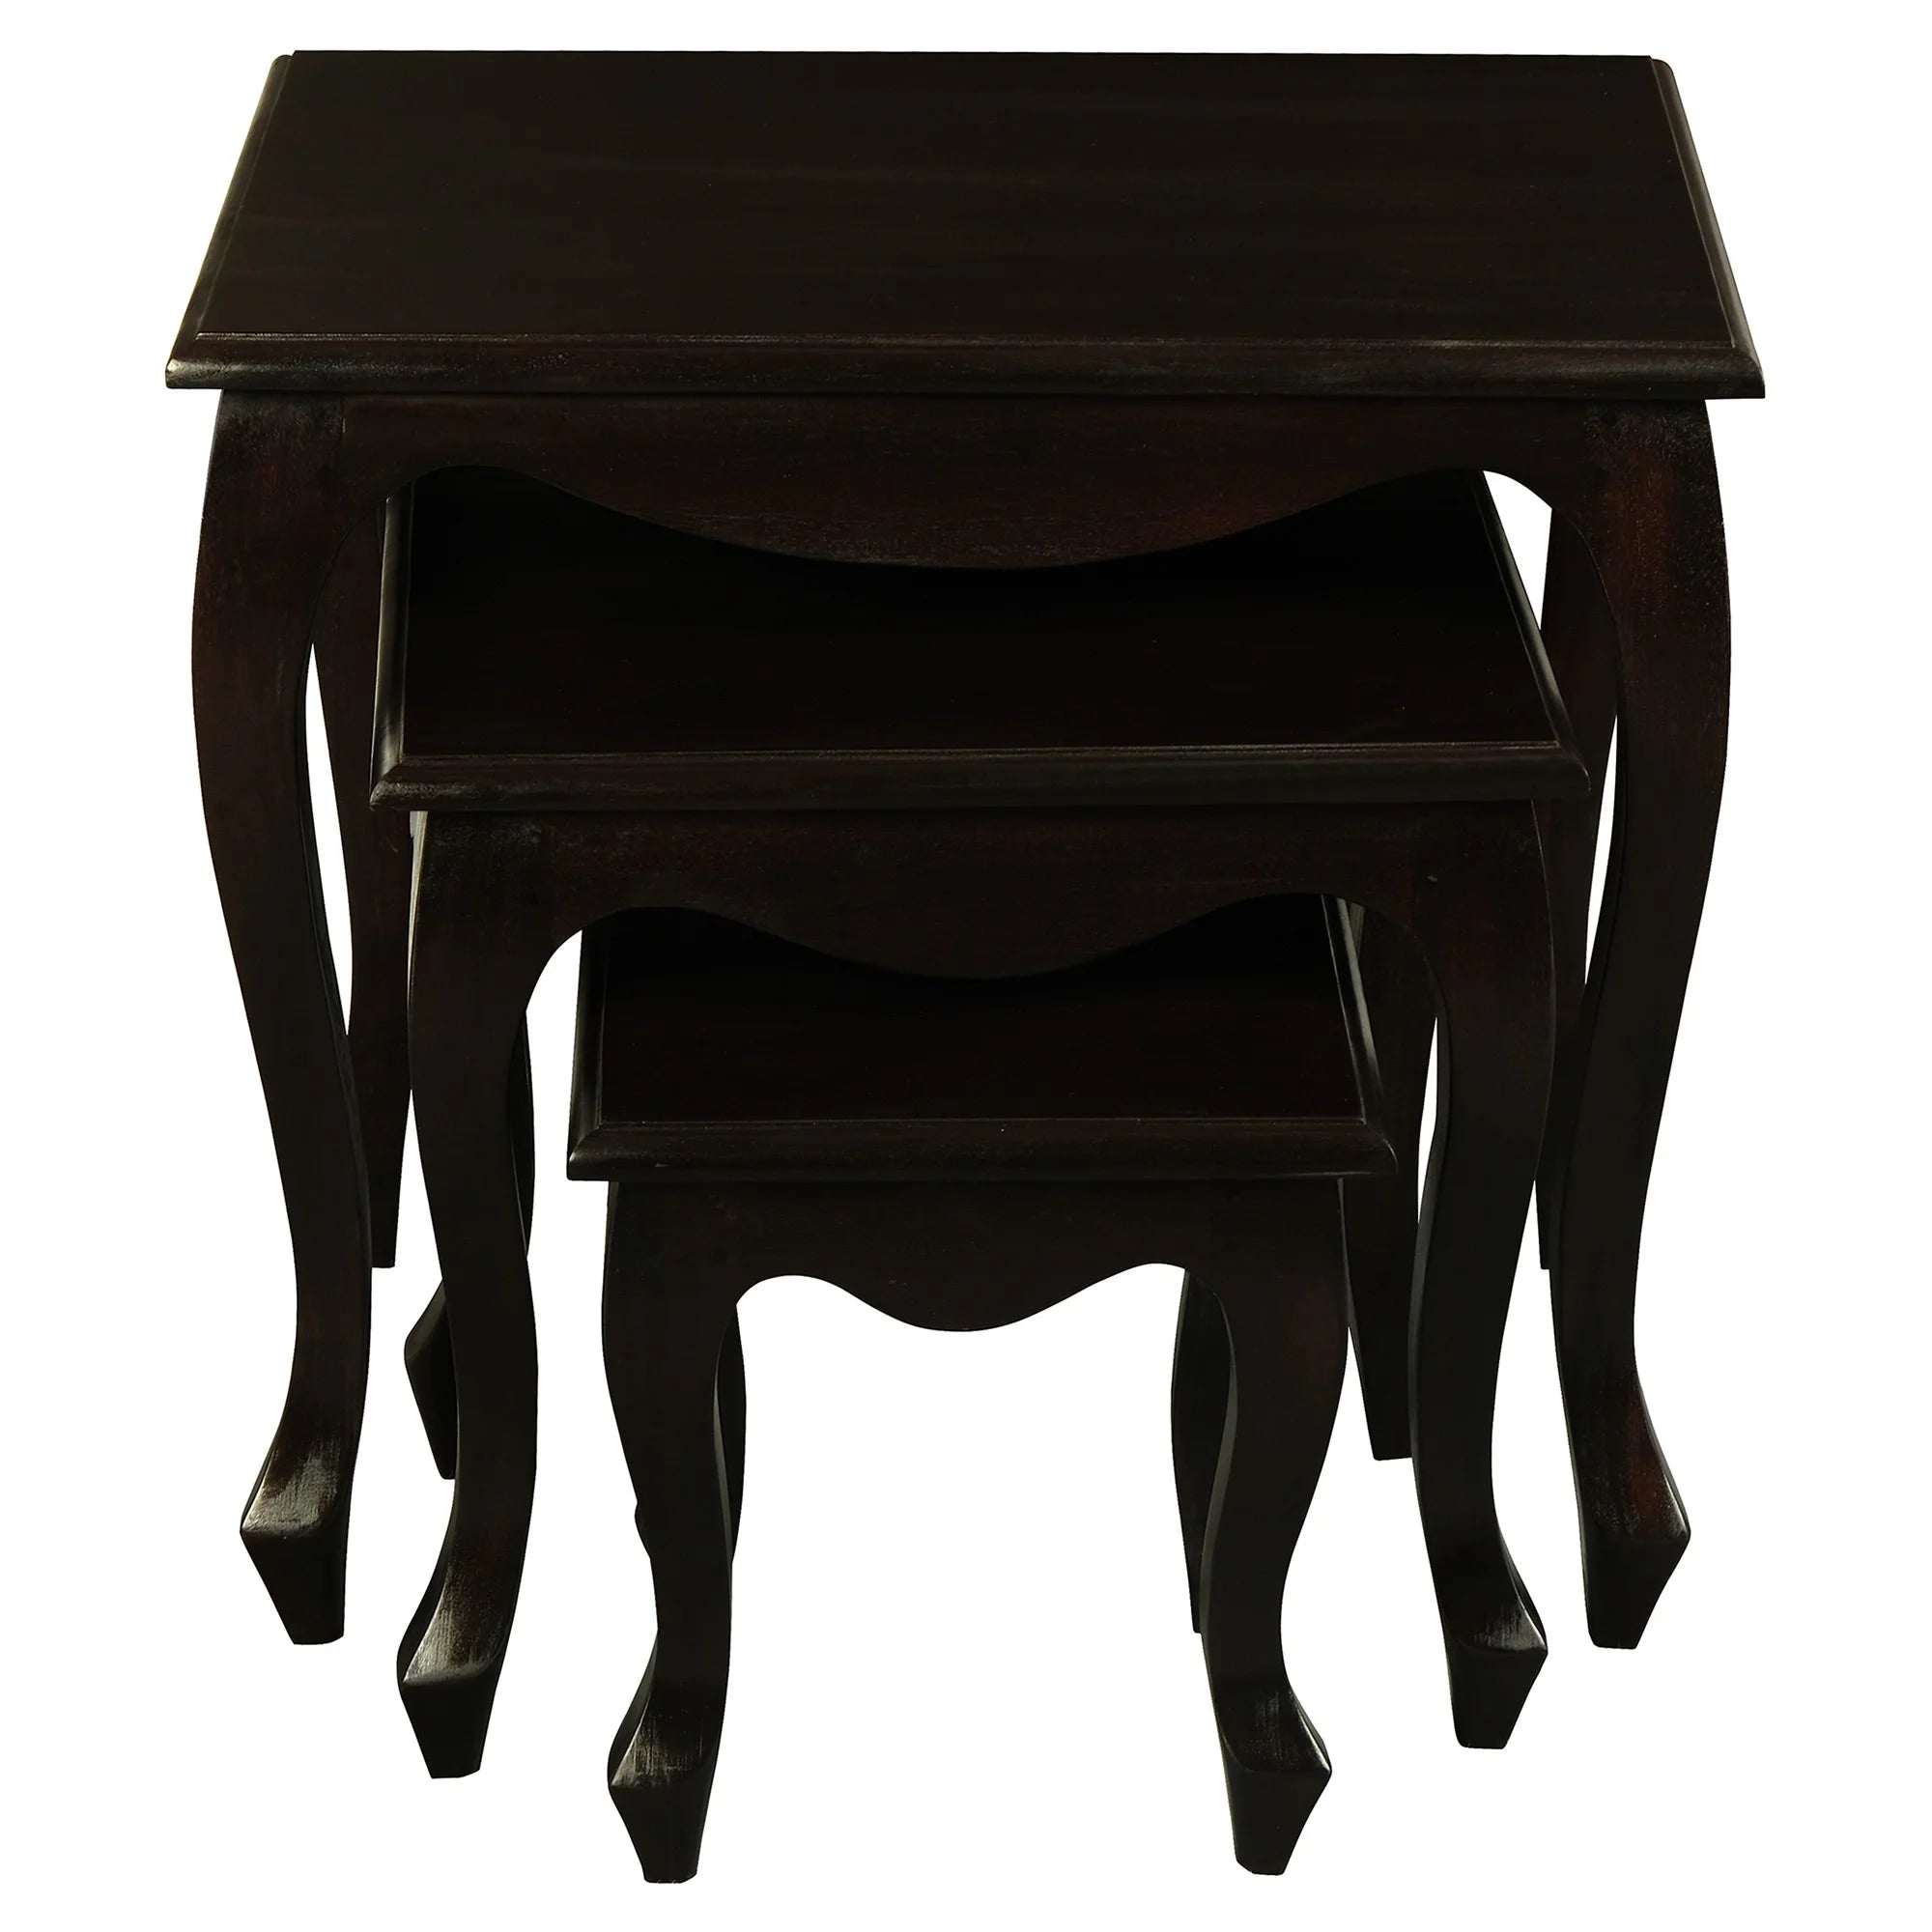 Set of 3 Queen Ann Timber Nested Tables - Chocolate - Notbrand